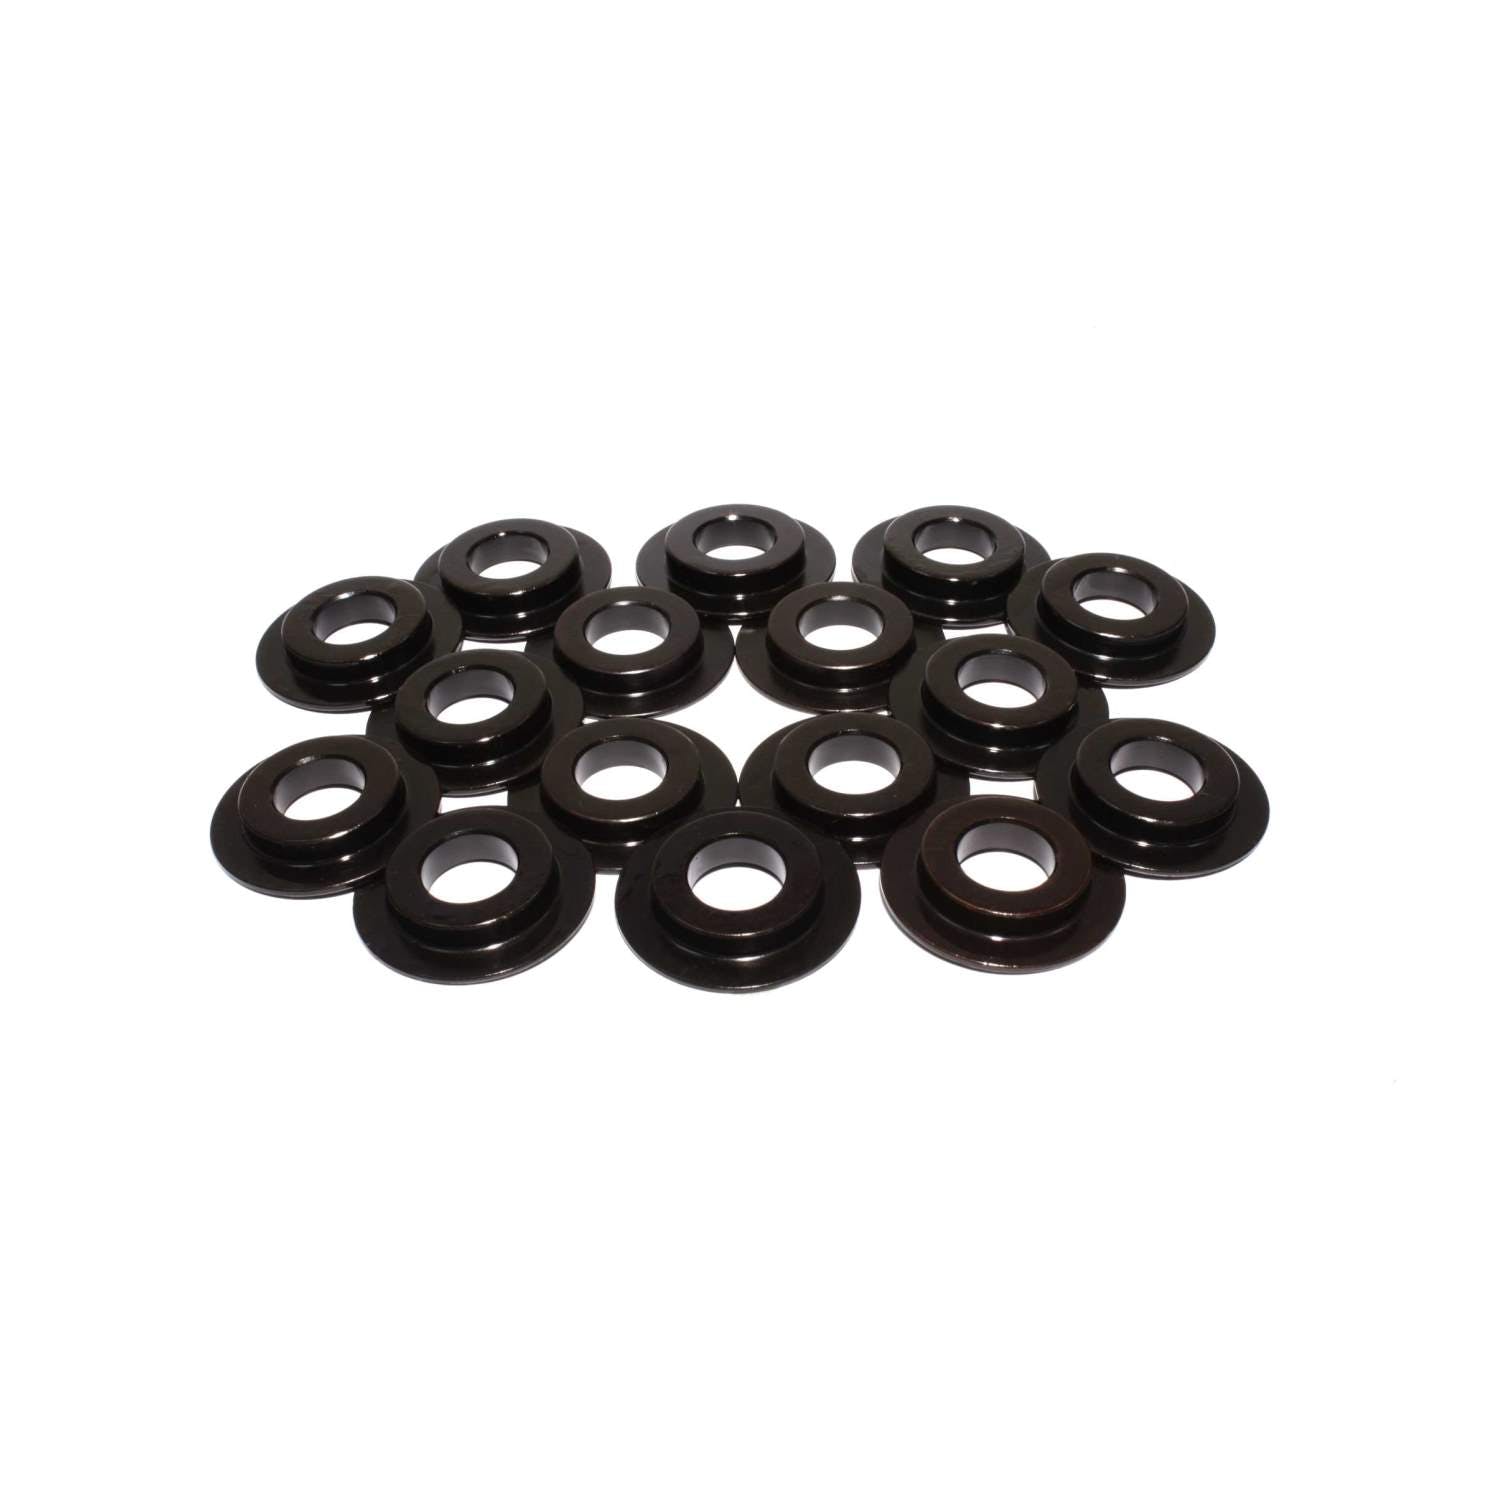 Competition Cams 4668-16 ID Spring Locator Set of 16 - 1.660 inch OD, .530 inch ID, .060 inch Thickness